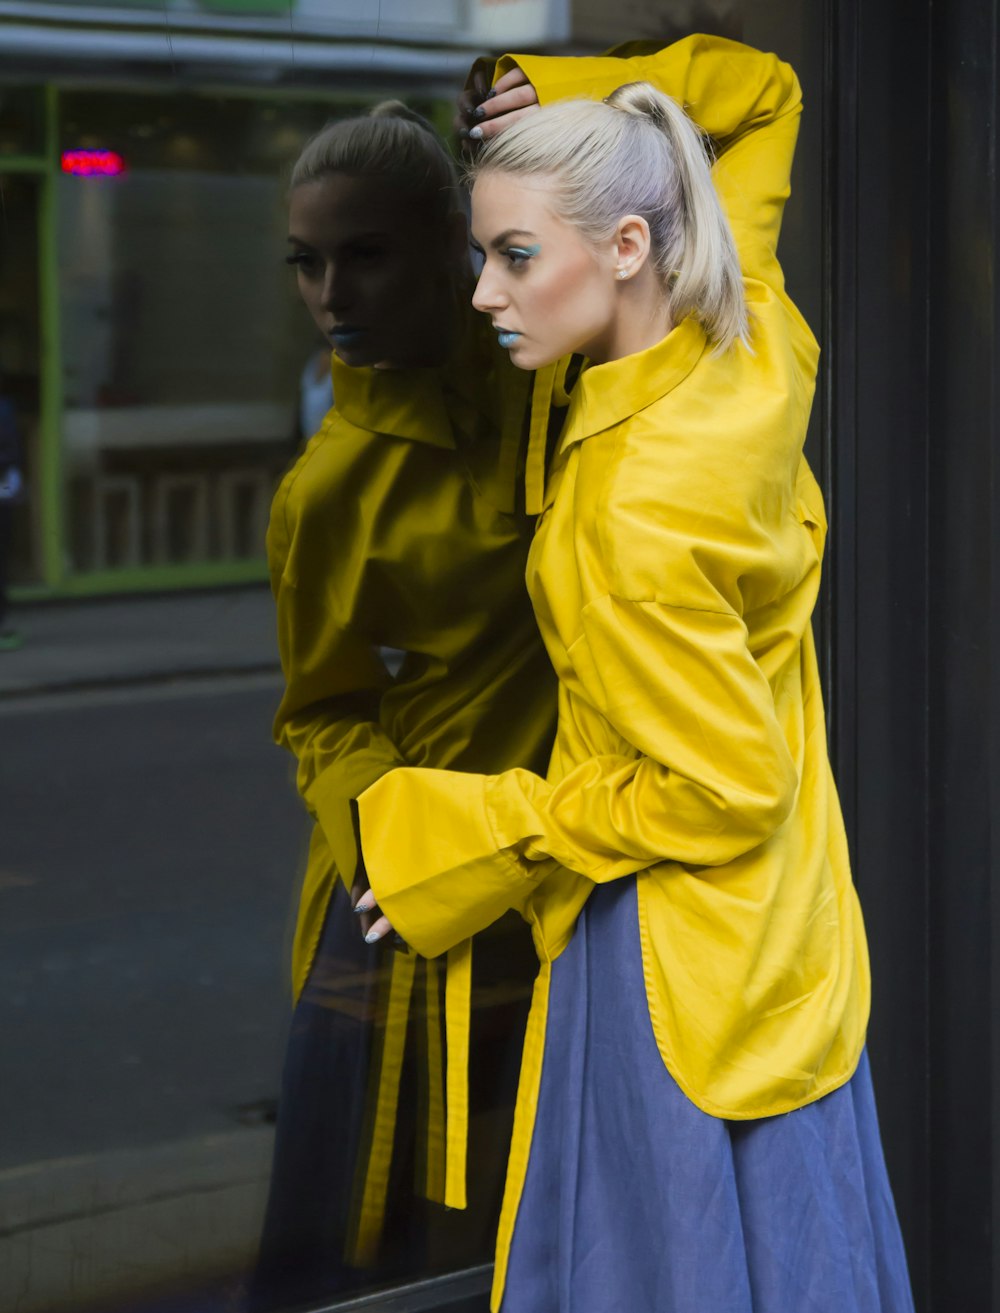 girl in yellow jacket and blue skirt standing on sidewalk during daytime